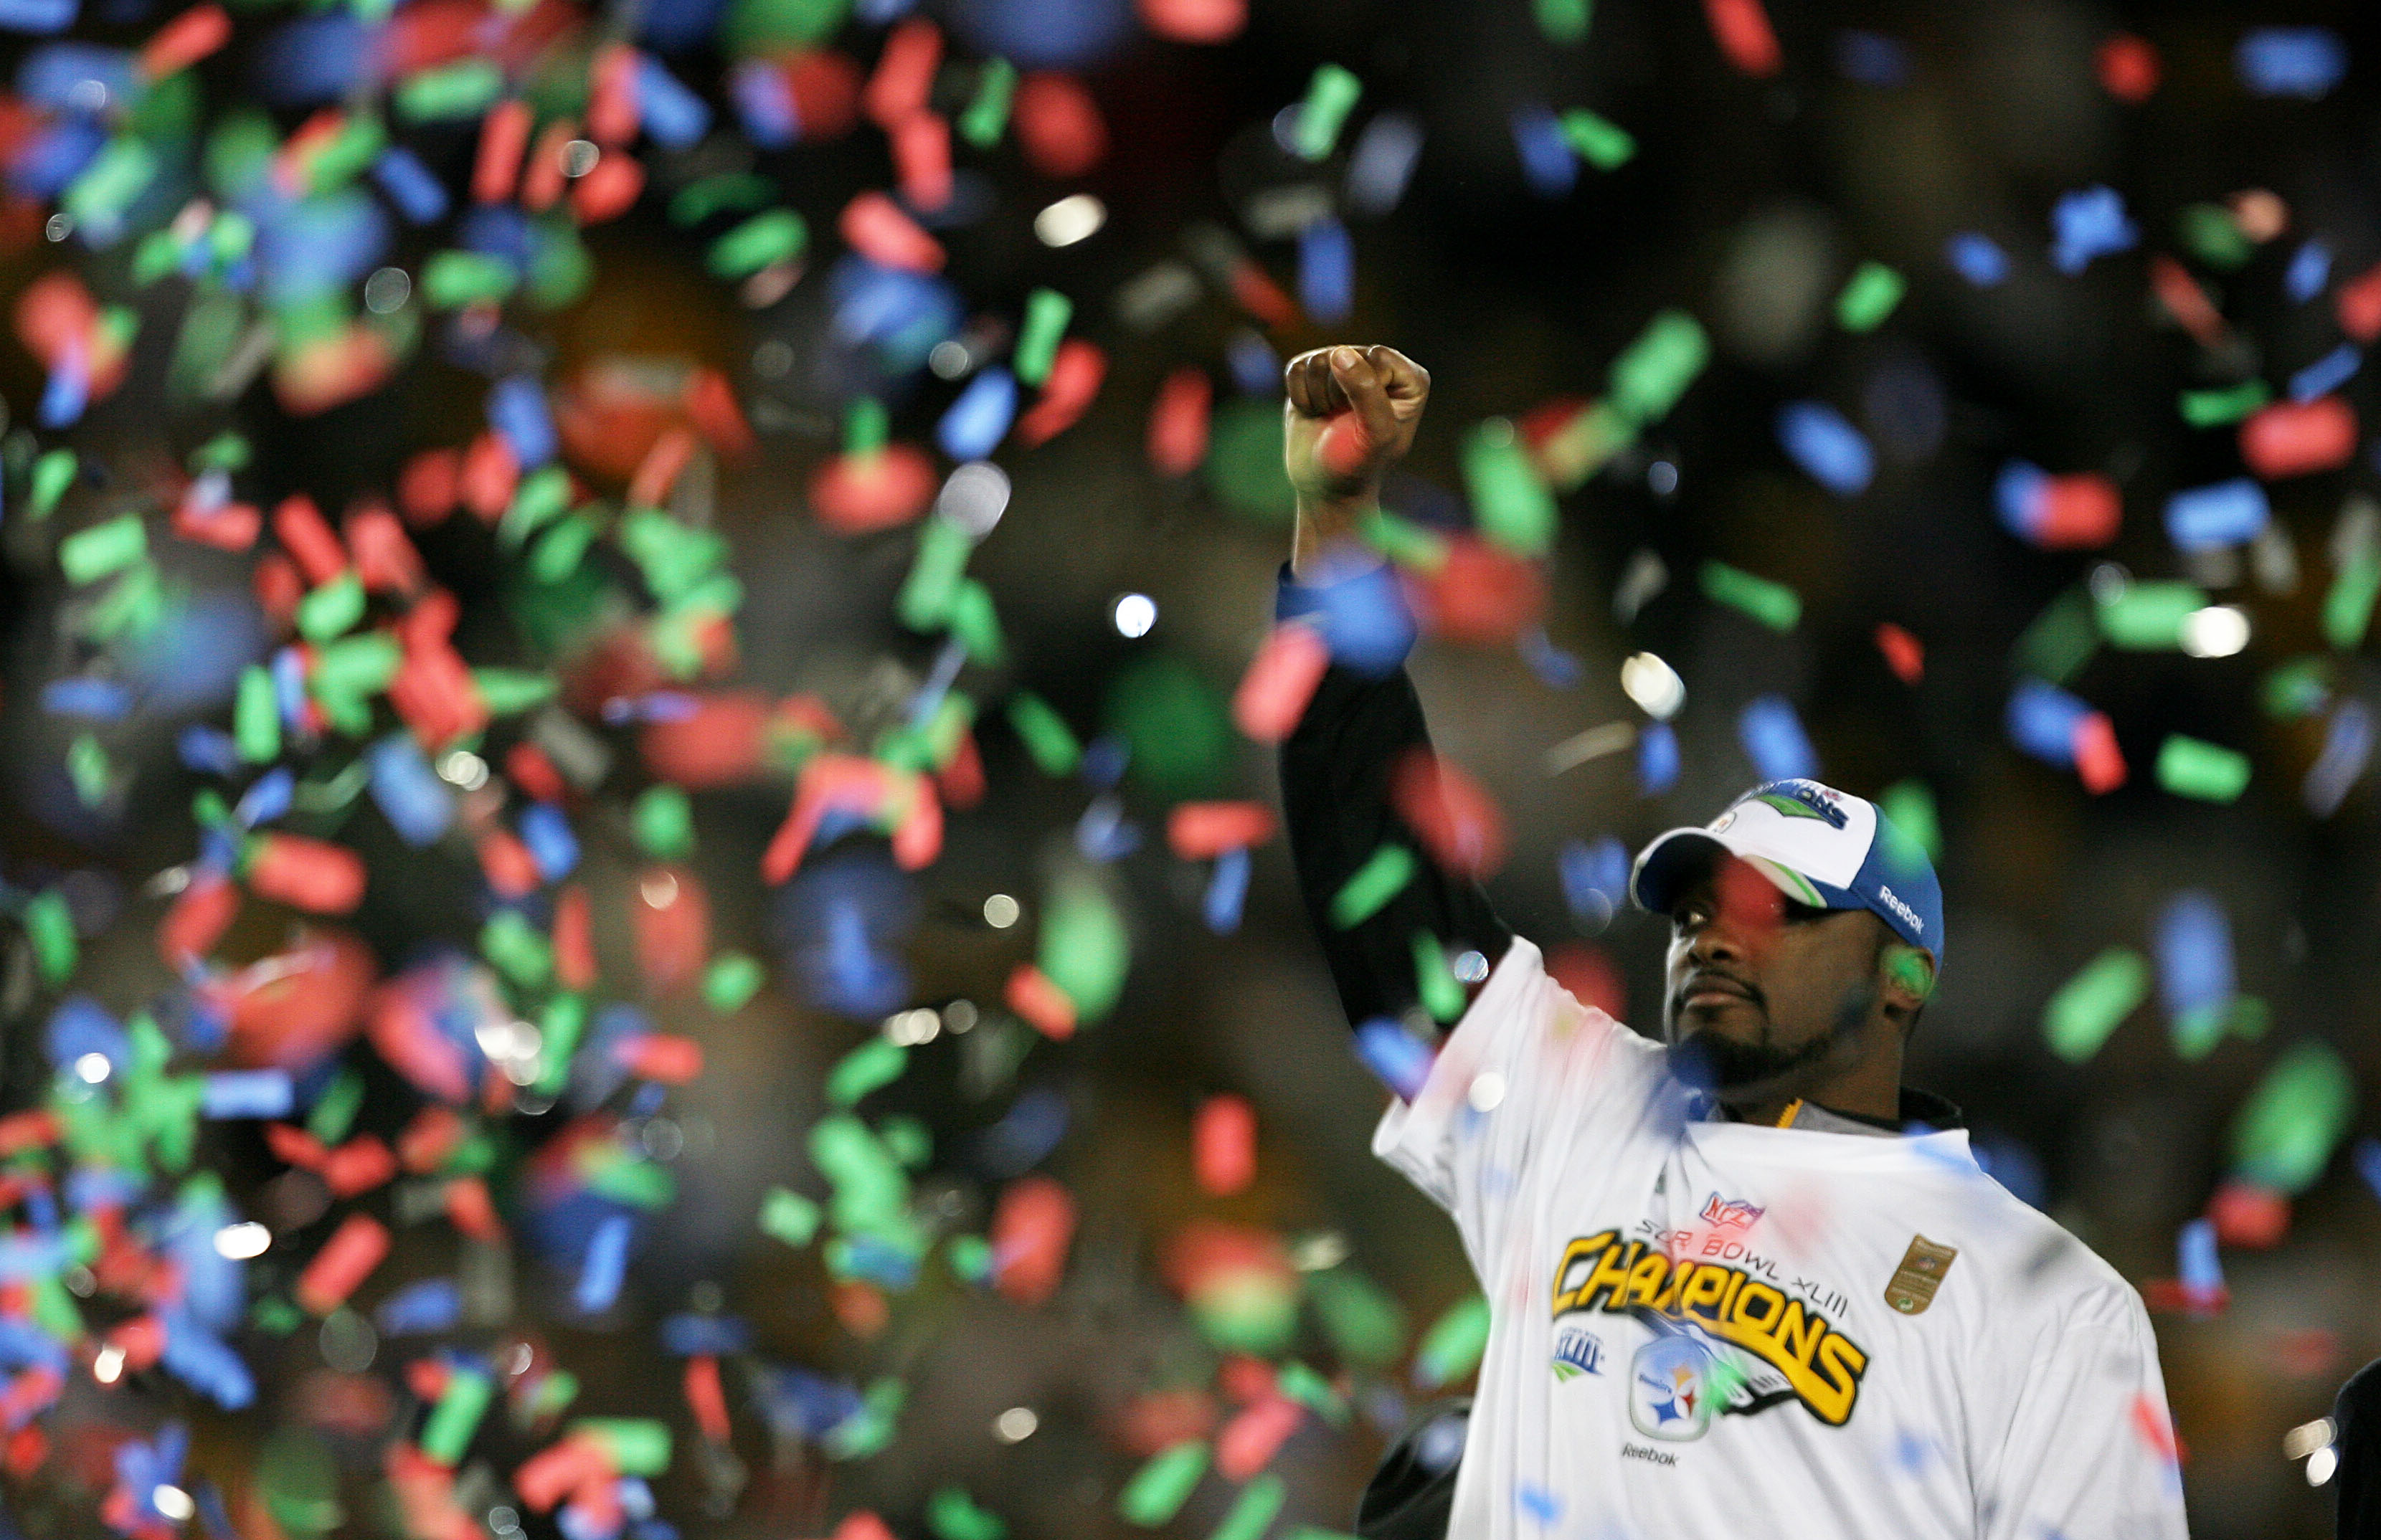 TAMPA, FL - FEBRUARY 01:  Head coach Mike Tomlin of the Pittsburgh Steelers celebrates as confetti falls after their 27-23 win against the Arizona Cardinals during Super Bowl XLIII on February 1, 2009 at Raymond James Stadium in Tampa, Florida.  (Photo by